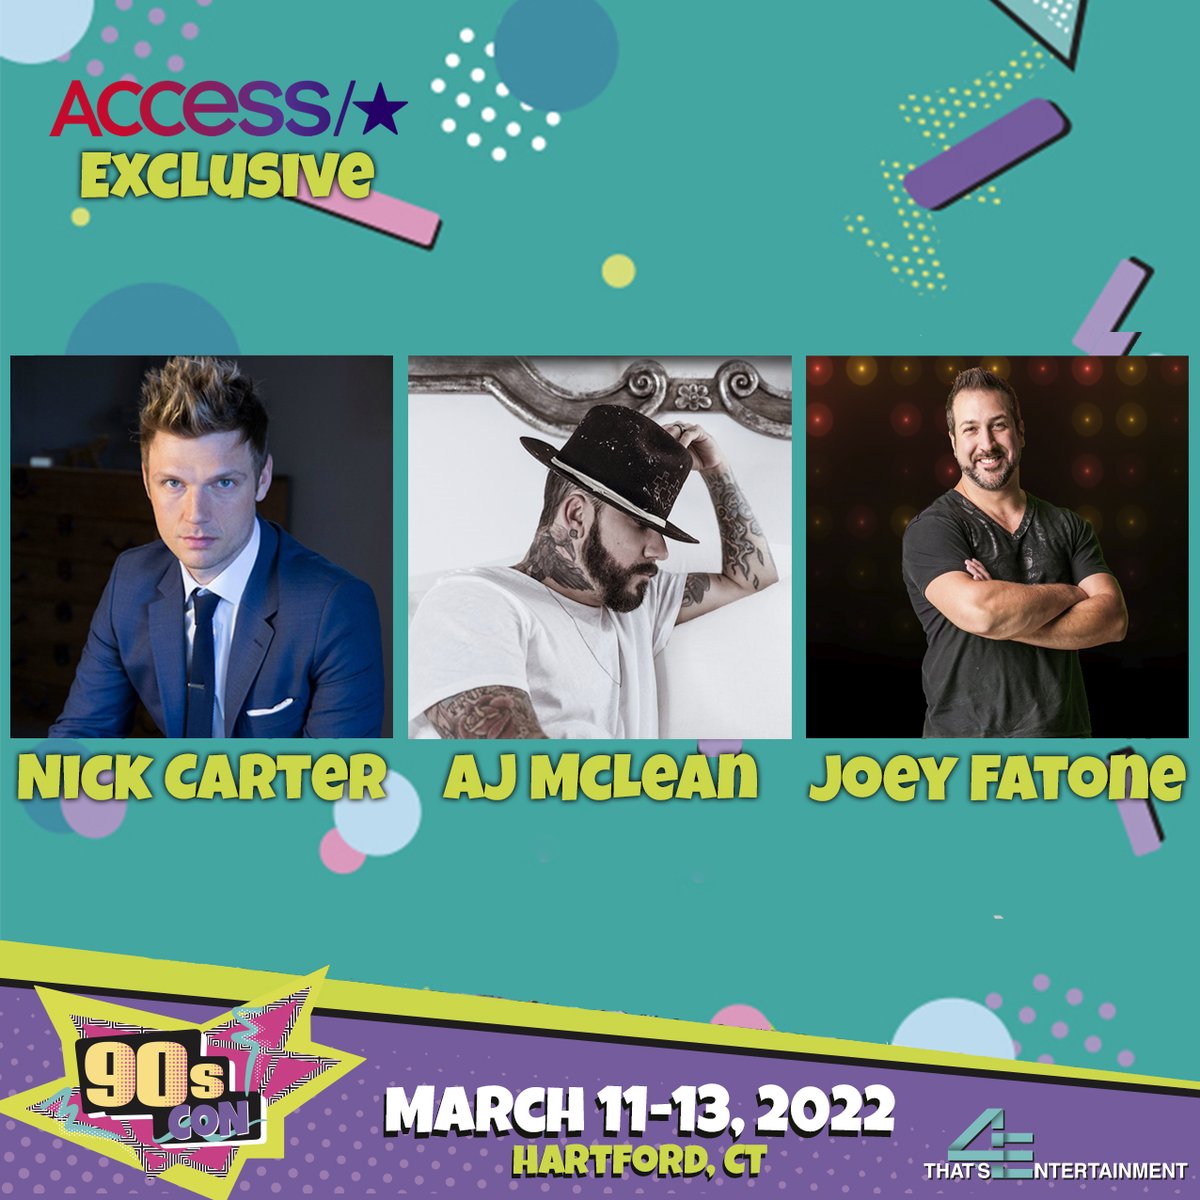 😱 This announcement is larger than life! 🤩 Thank you so much @accesshollywood for the exclusive! We are very excited to welcome @nickcarter, @aj_mclean and @realjoeyfatone to #90sCon! We can’t wait to see you there, no strings attached! 😉